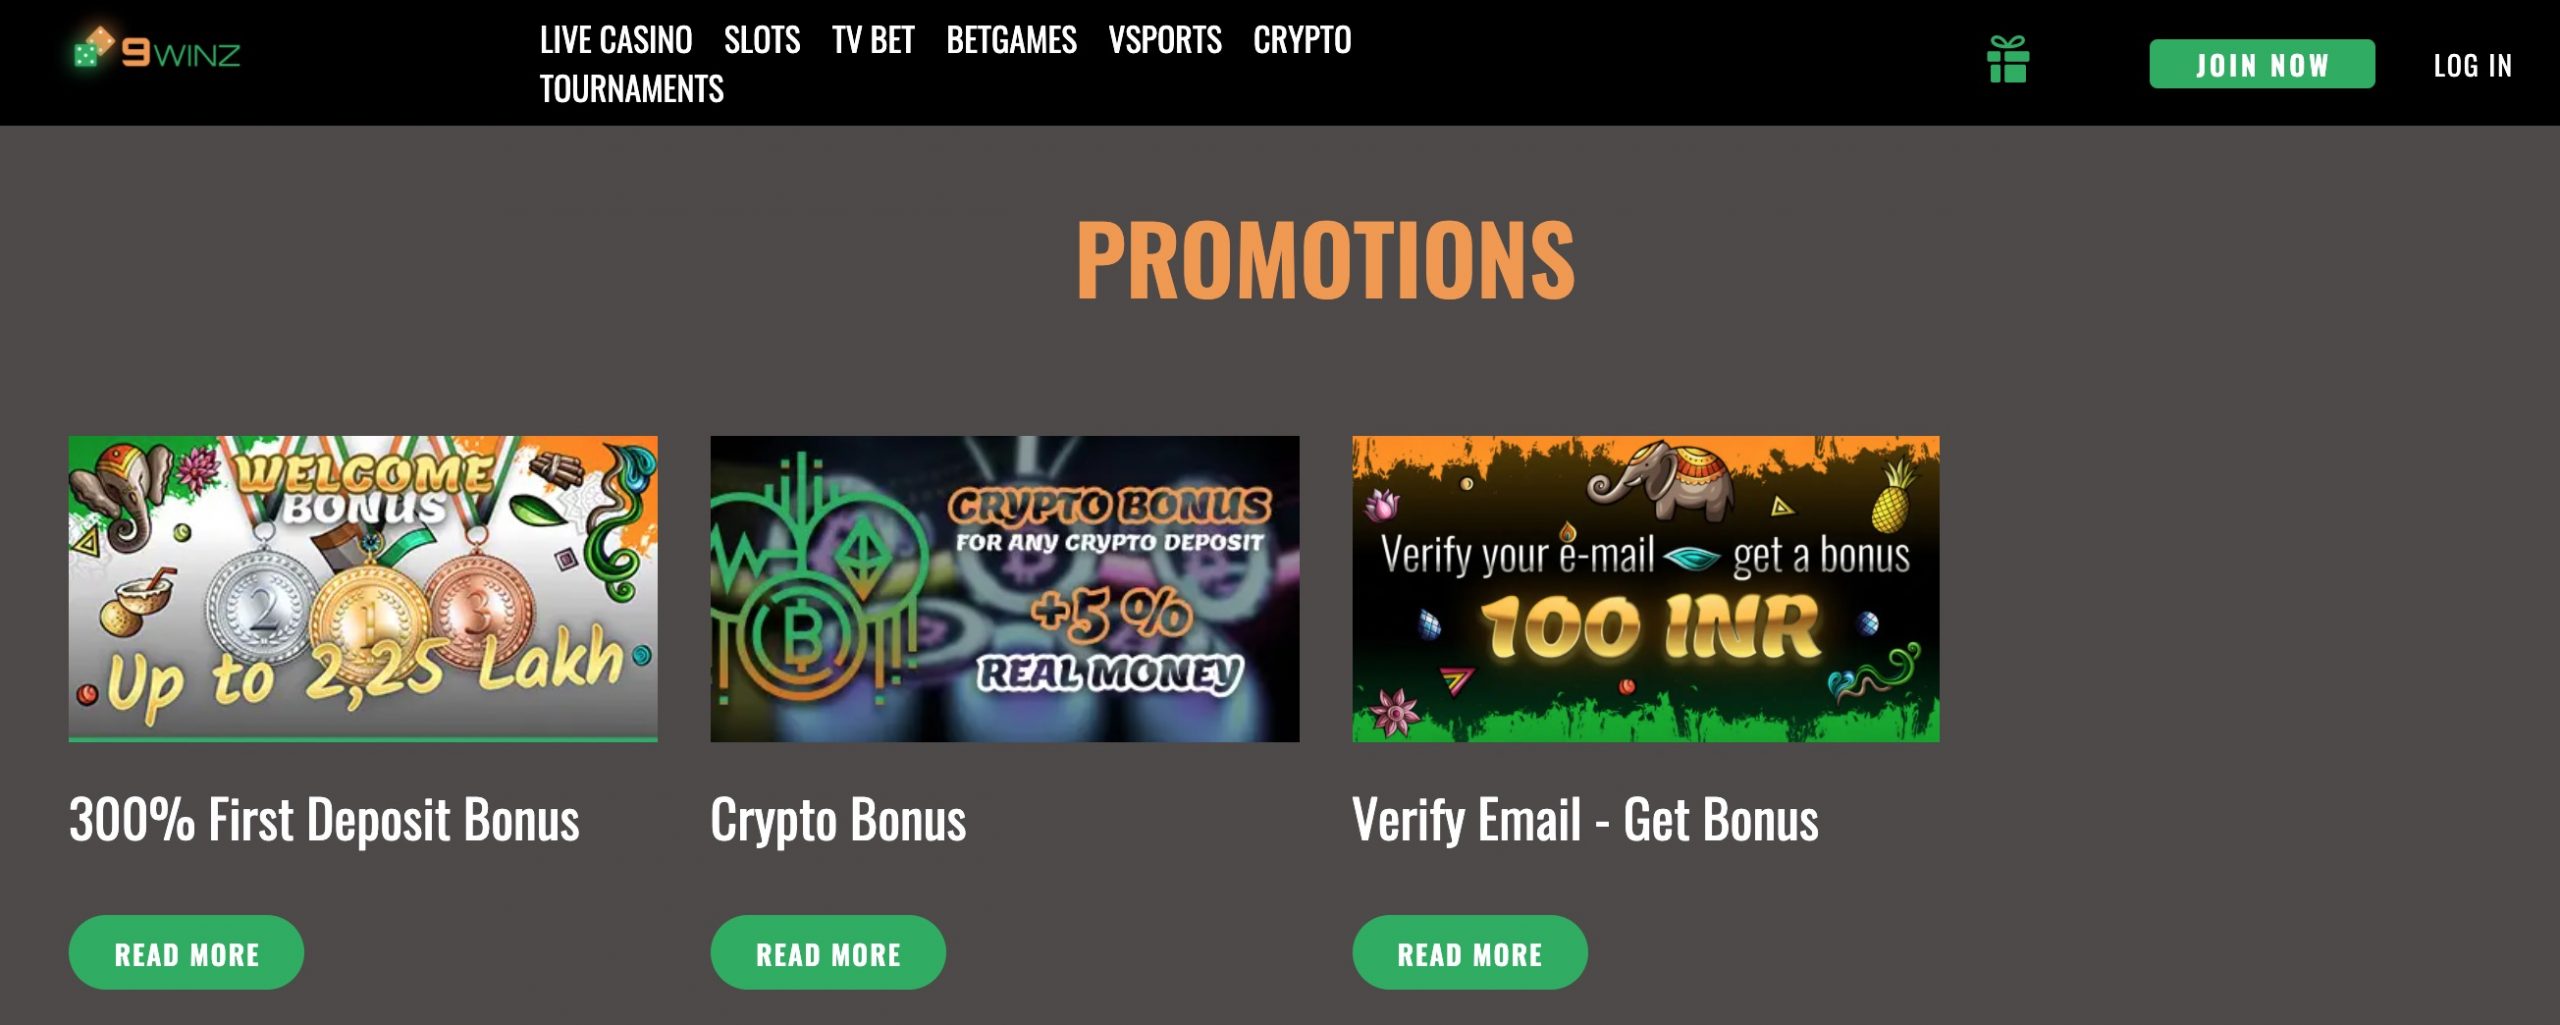 Guide on Using Hot 9winz Bonus Promotions, Free Cash and Free Spins